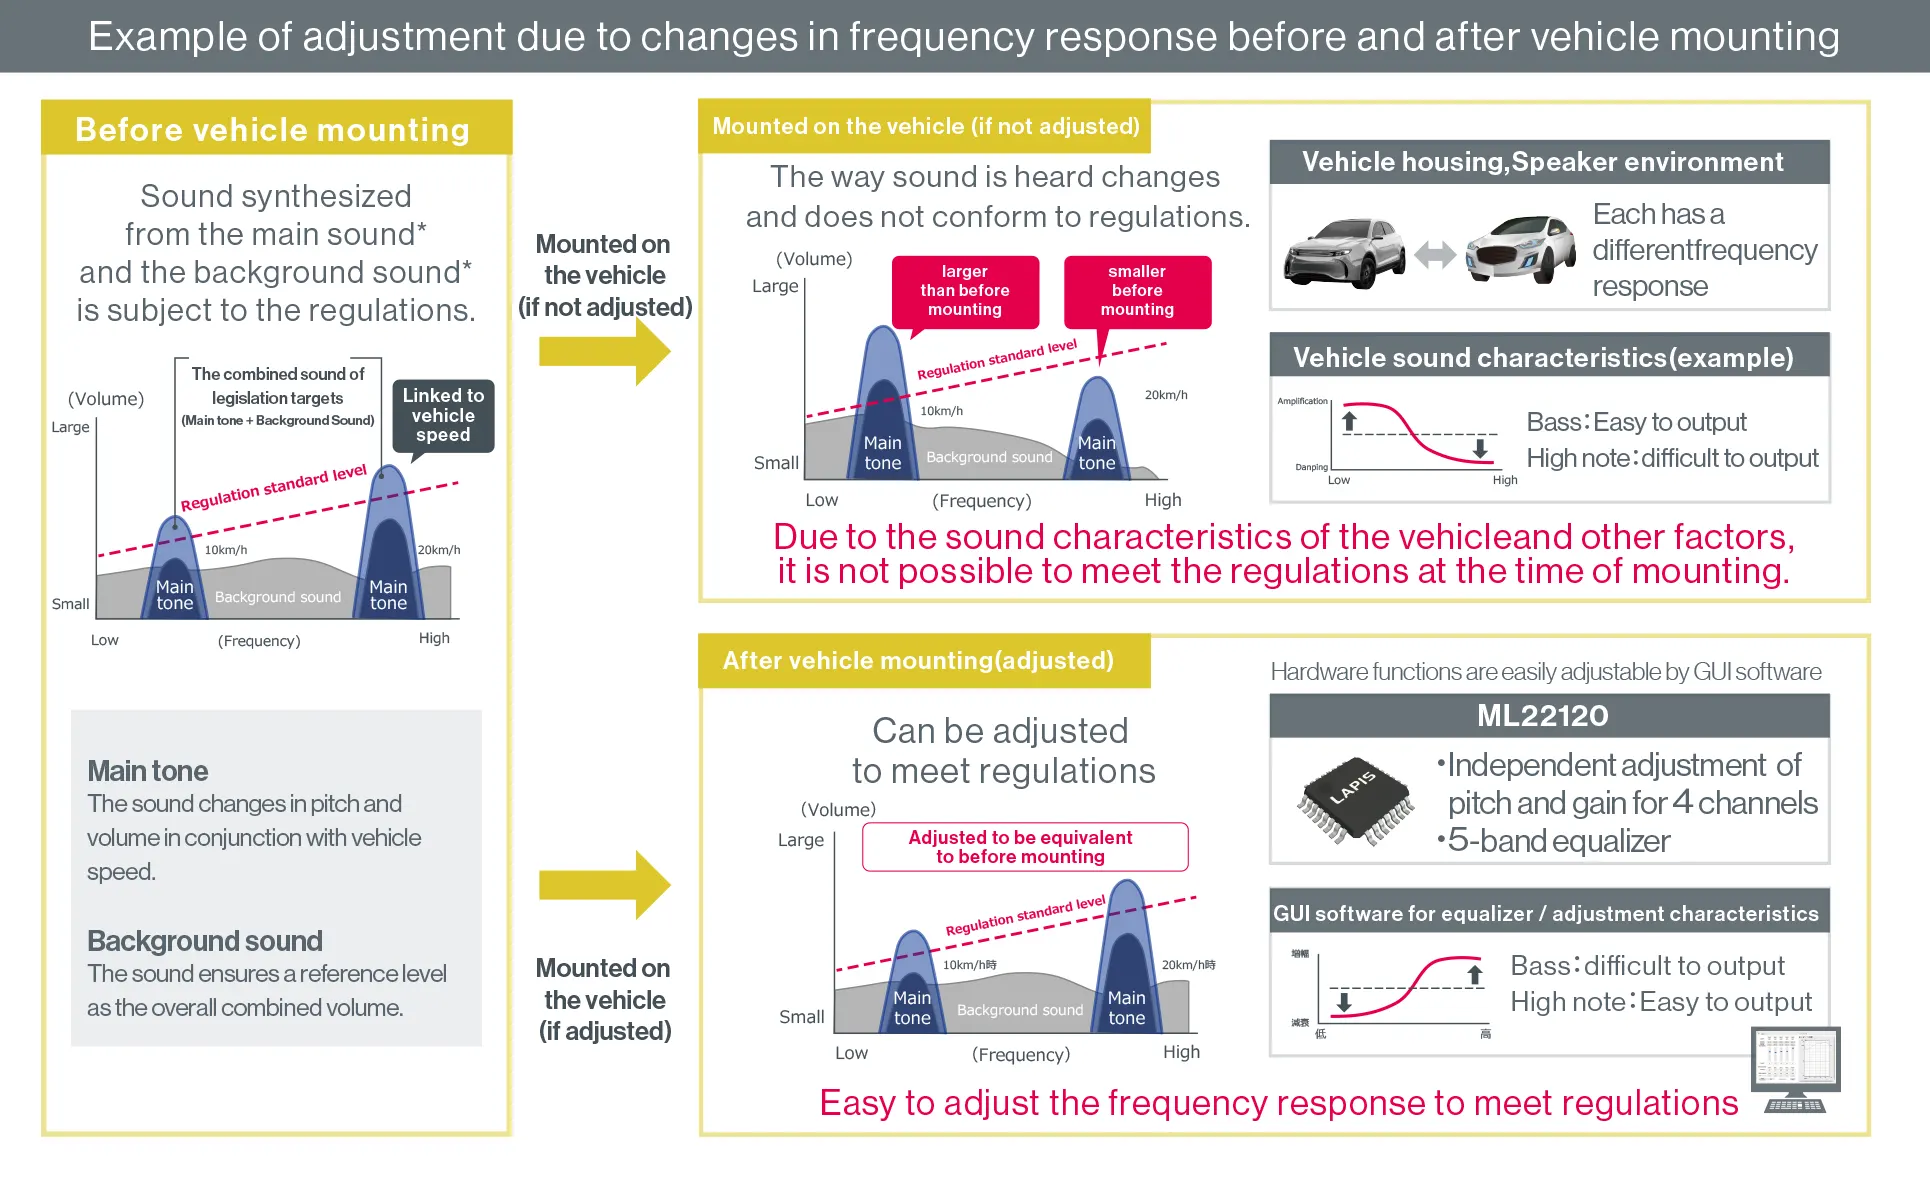 Example of adjustment due to changes in frequency response before and after vehicle mounting